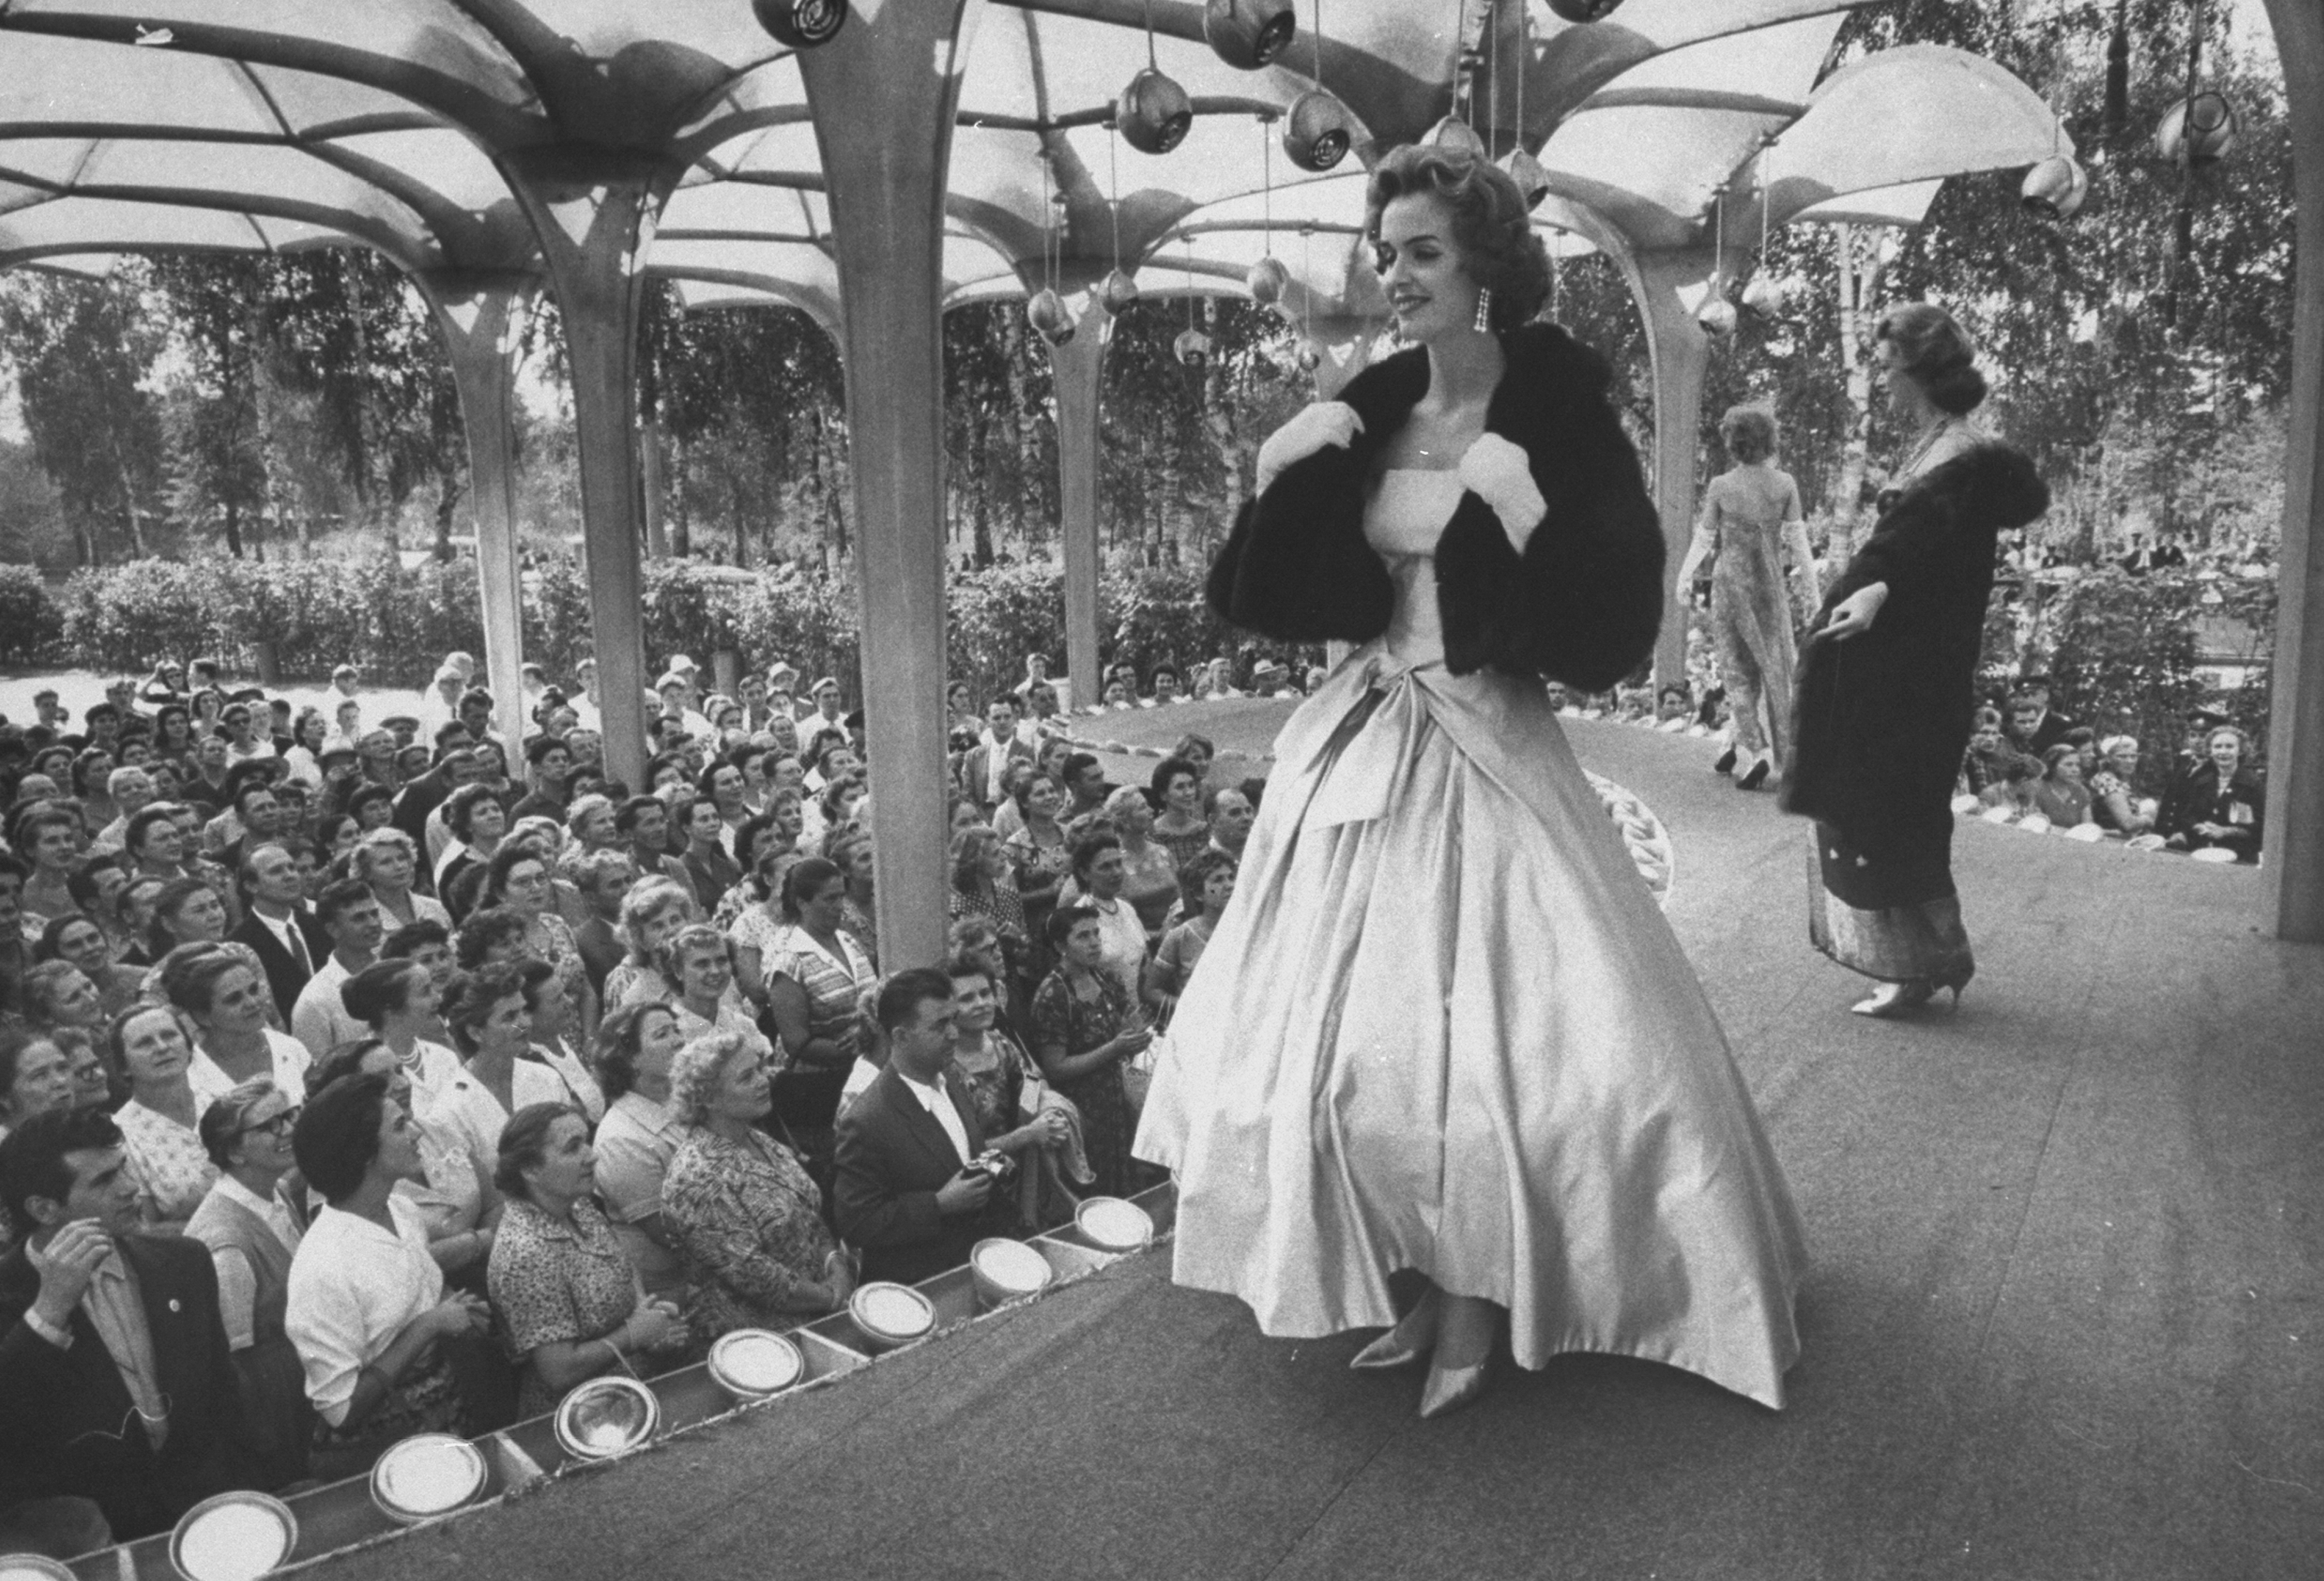 A woman models a gown at a special showing of American fashions in Moscow, 1959 (Carl Mydans—The LIFE Picture Collection/Getty Images)